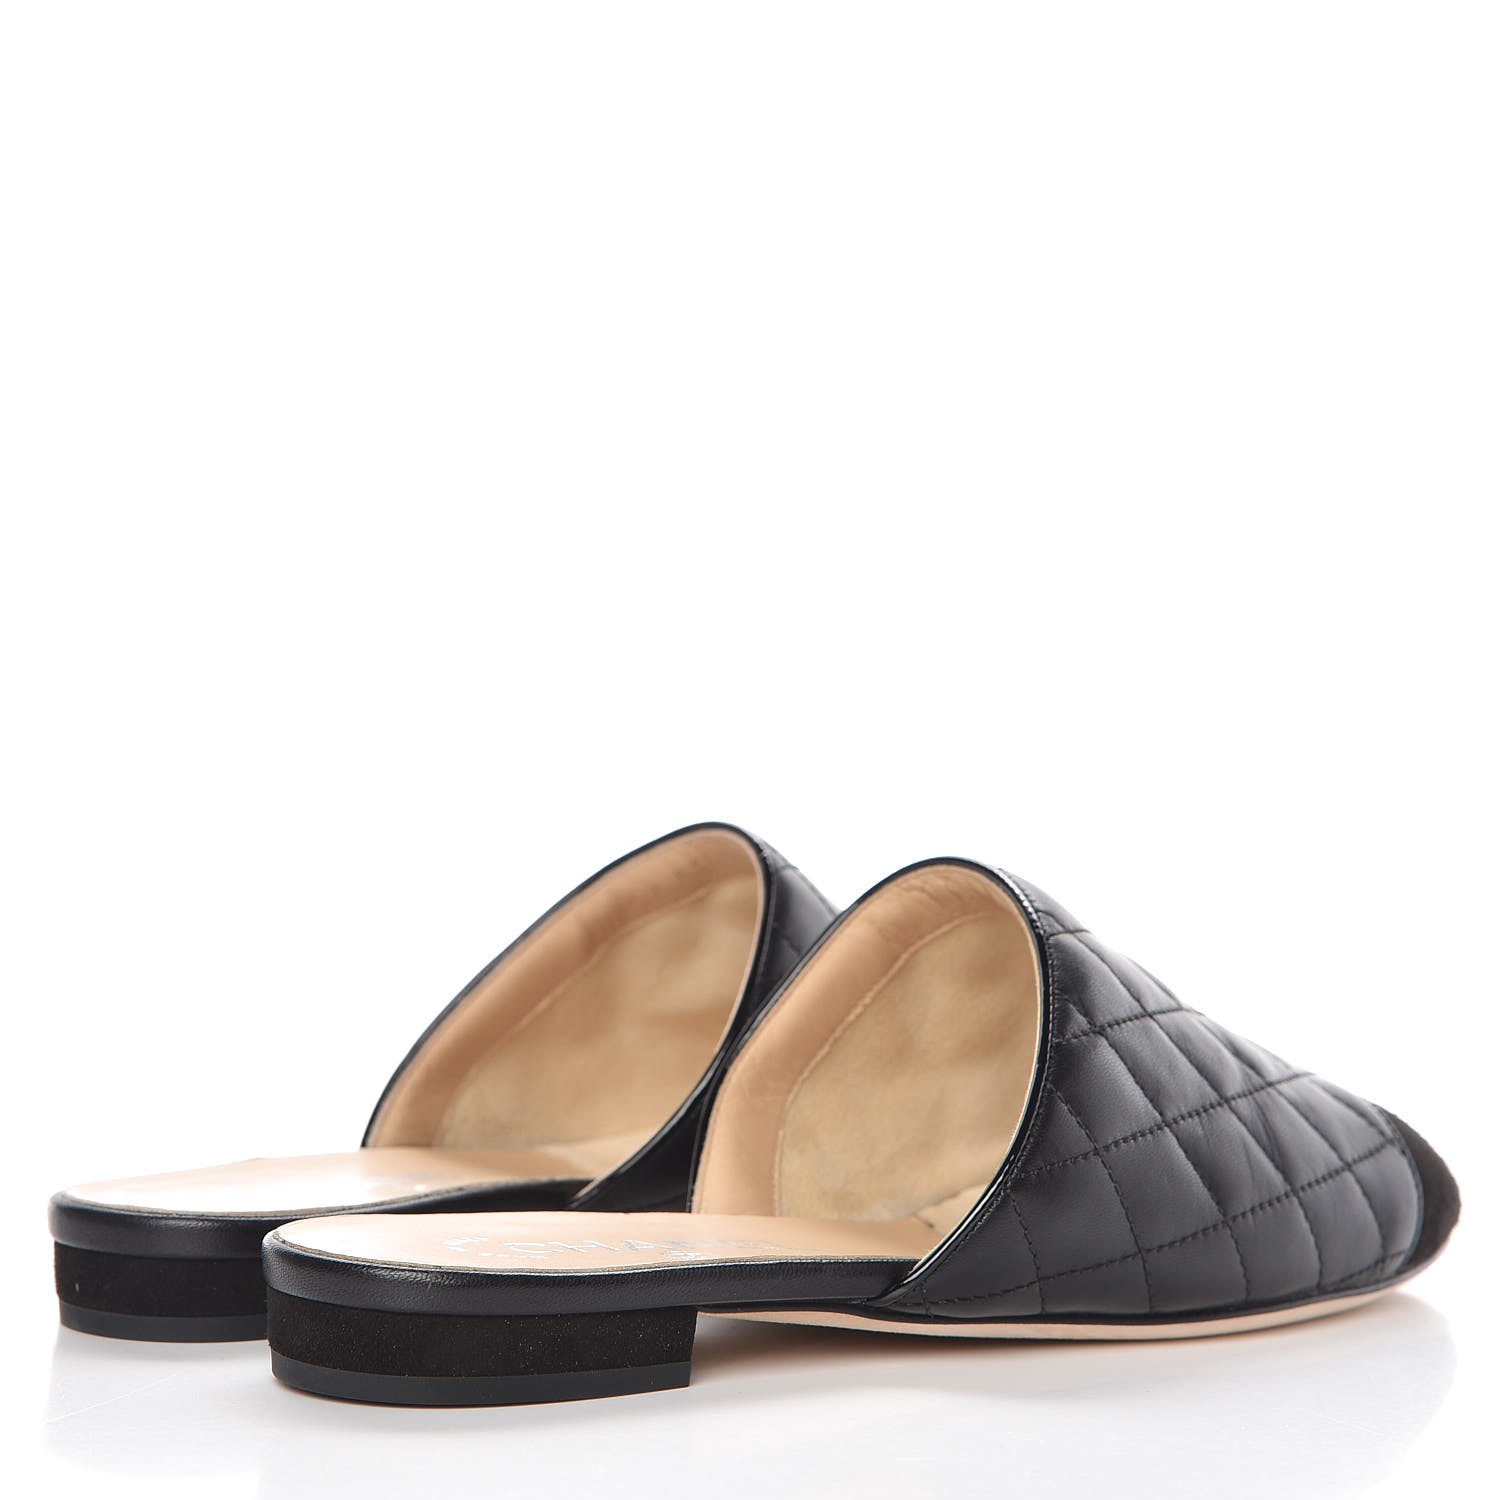 CHANEL Lambskin Suede Quilted Mules 37.5 Black 333167